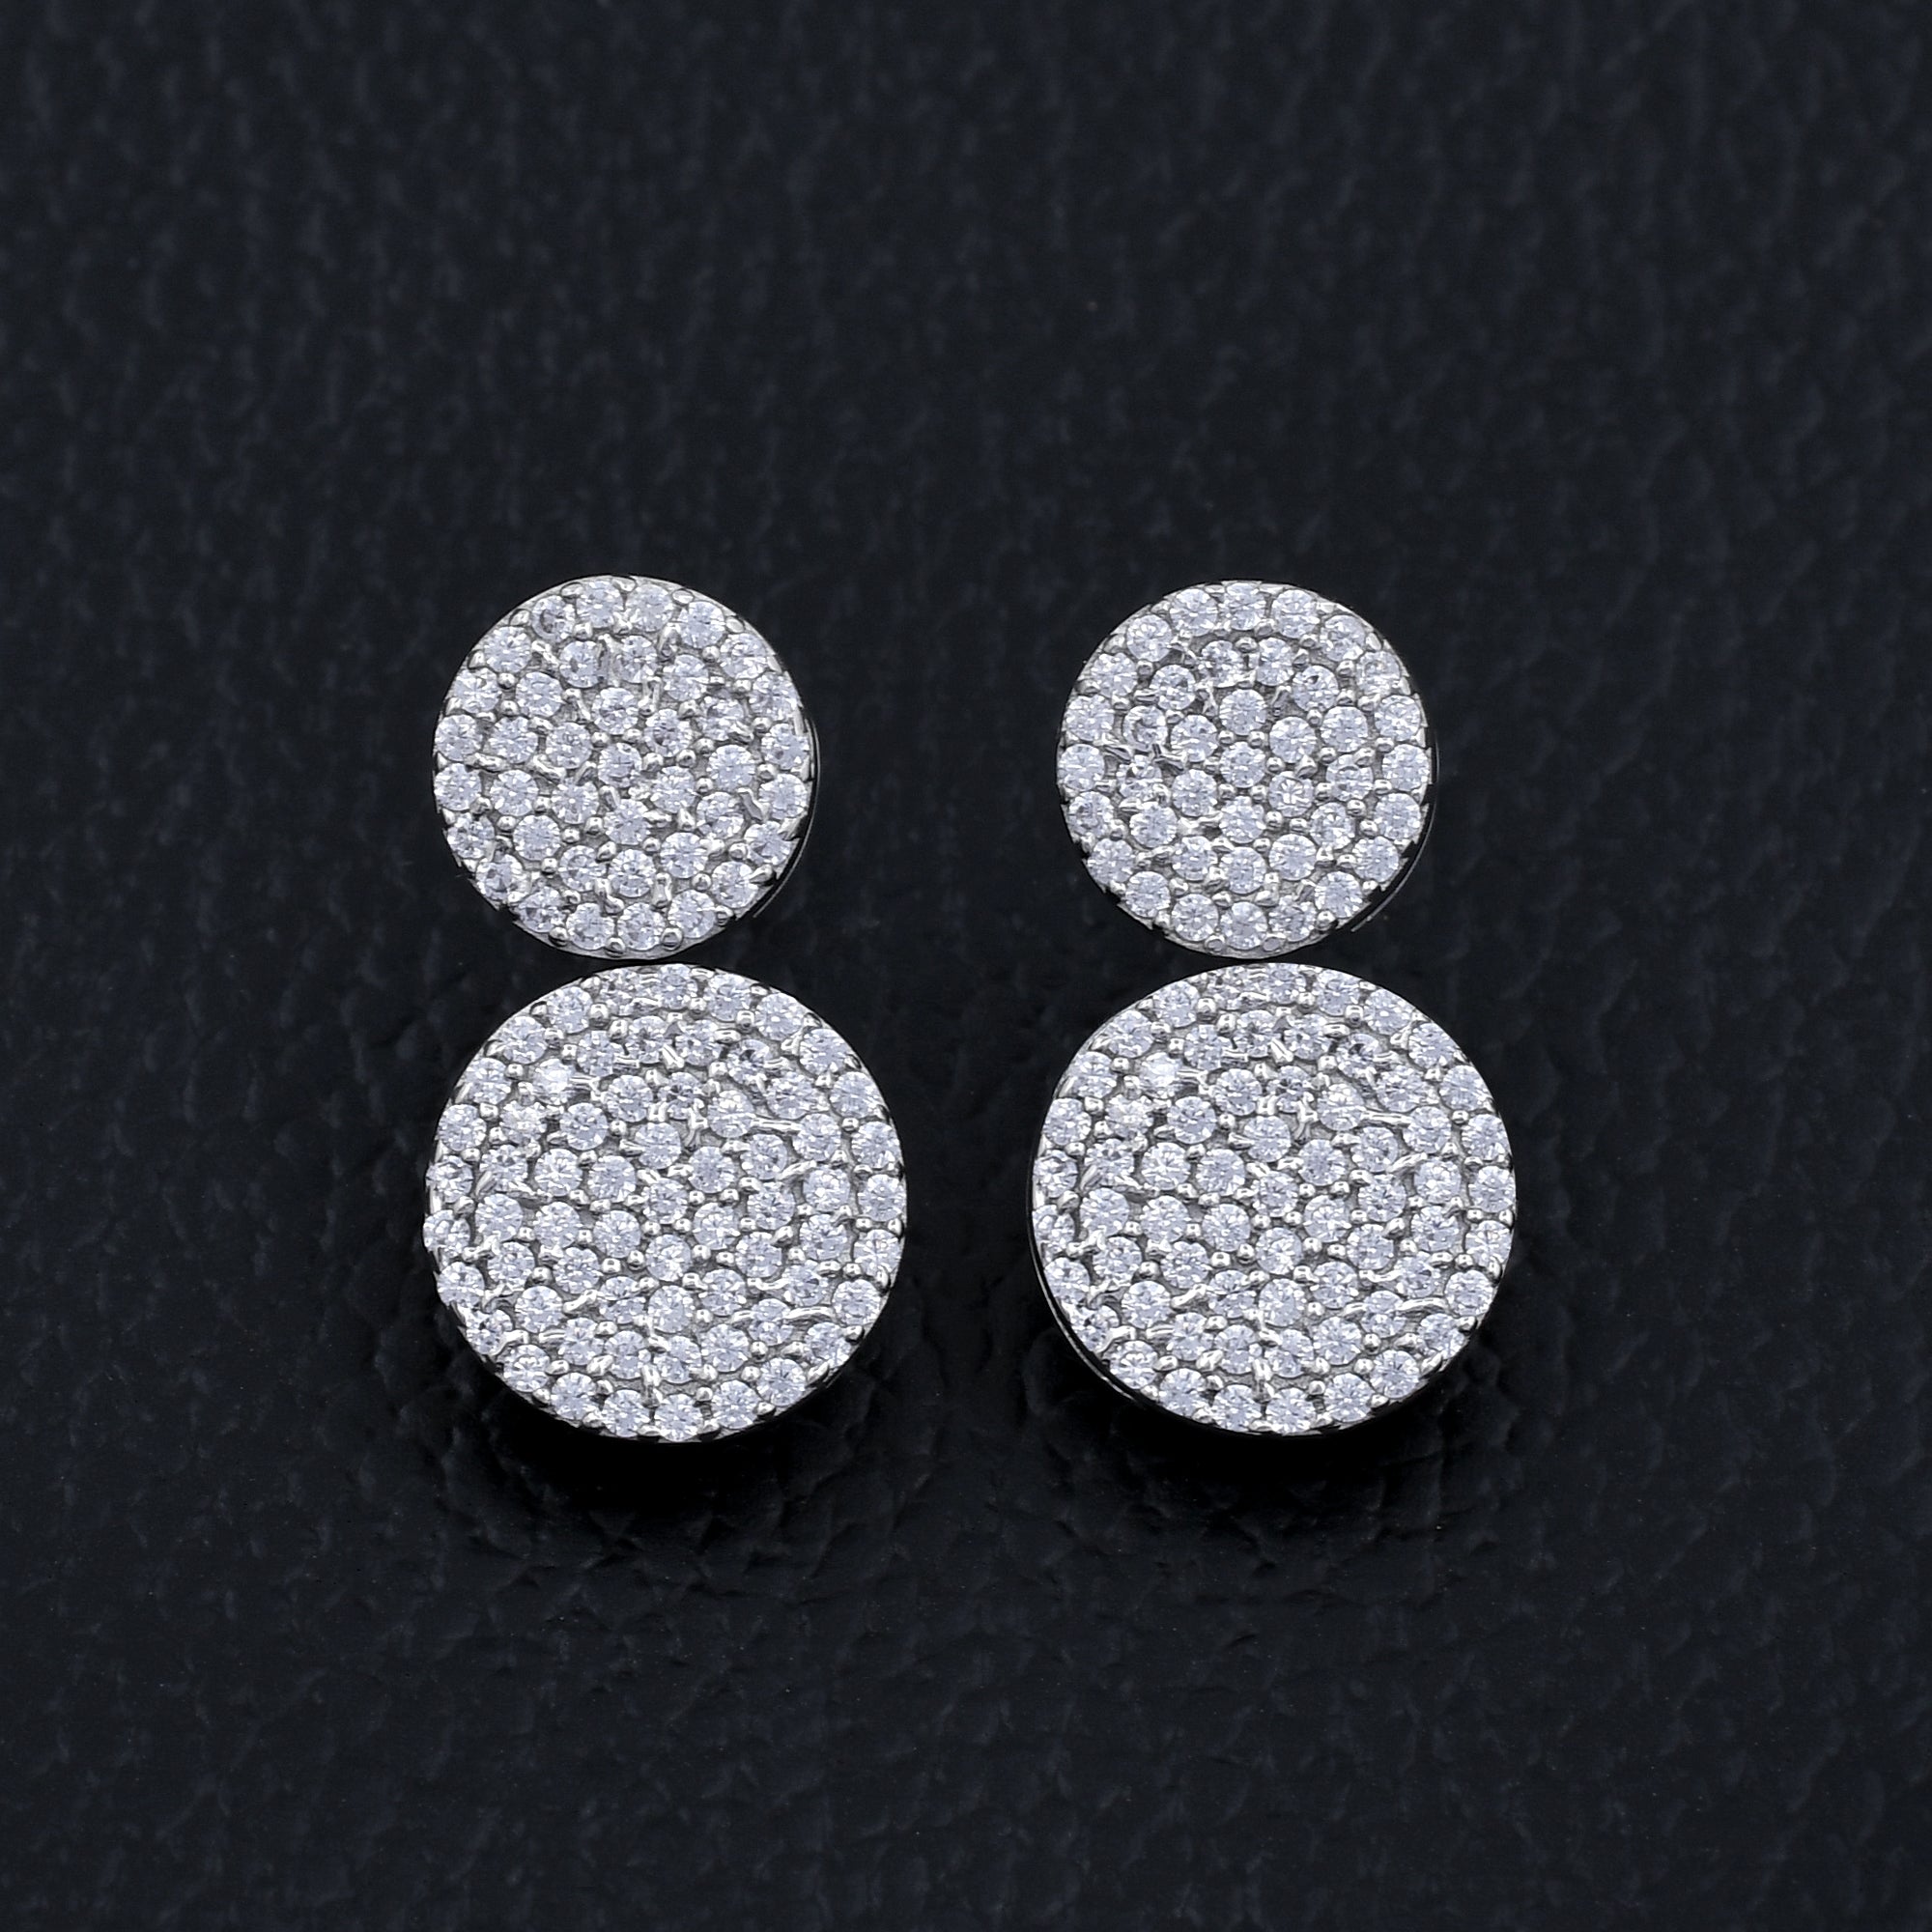 Adorable 925 Sterling Silver Earring